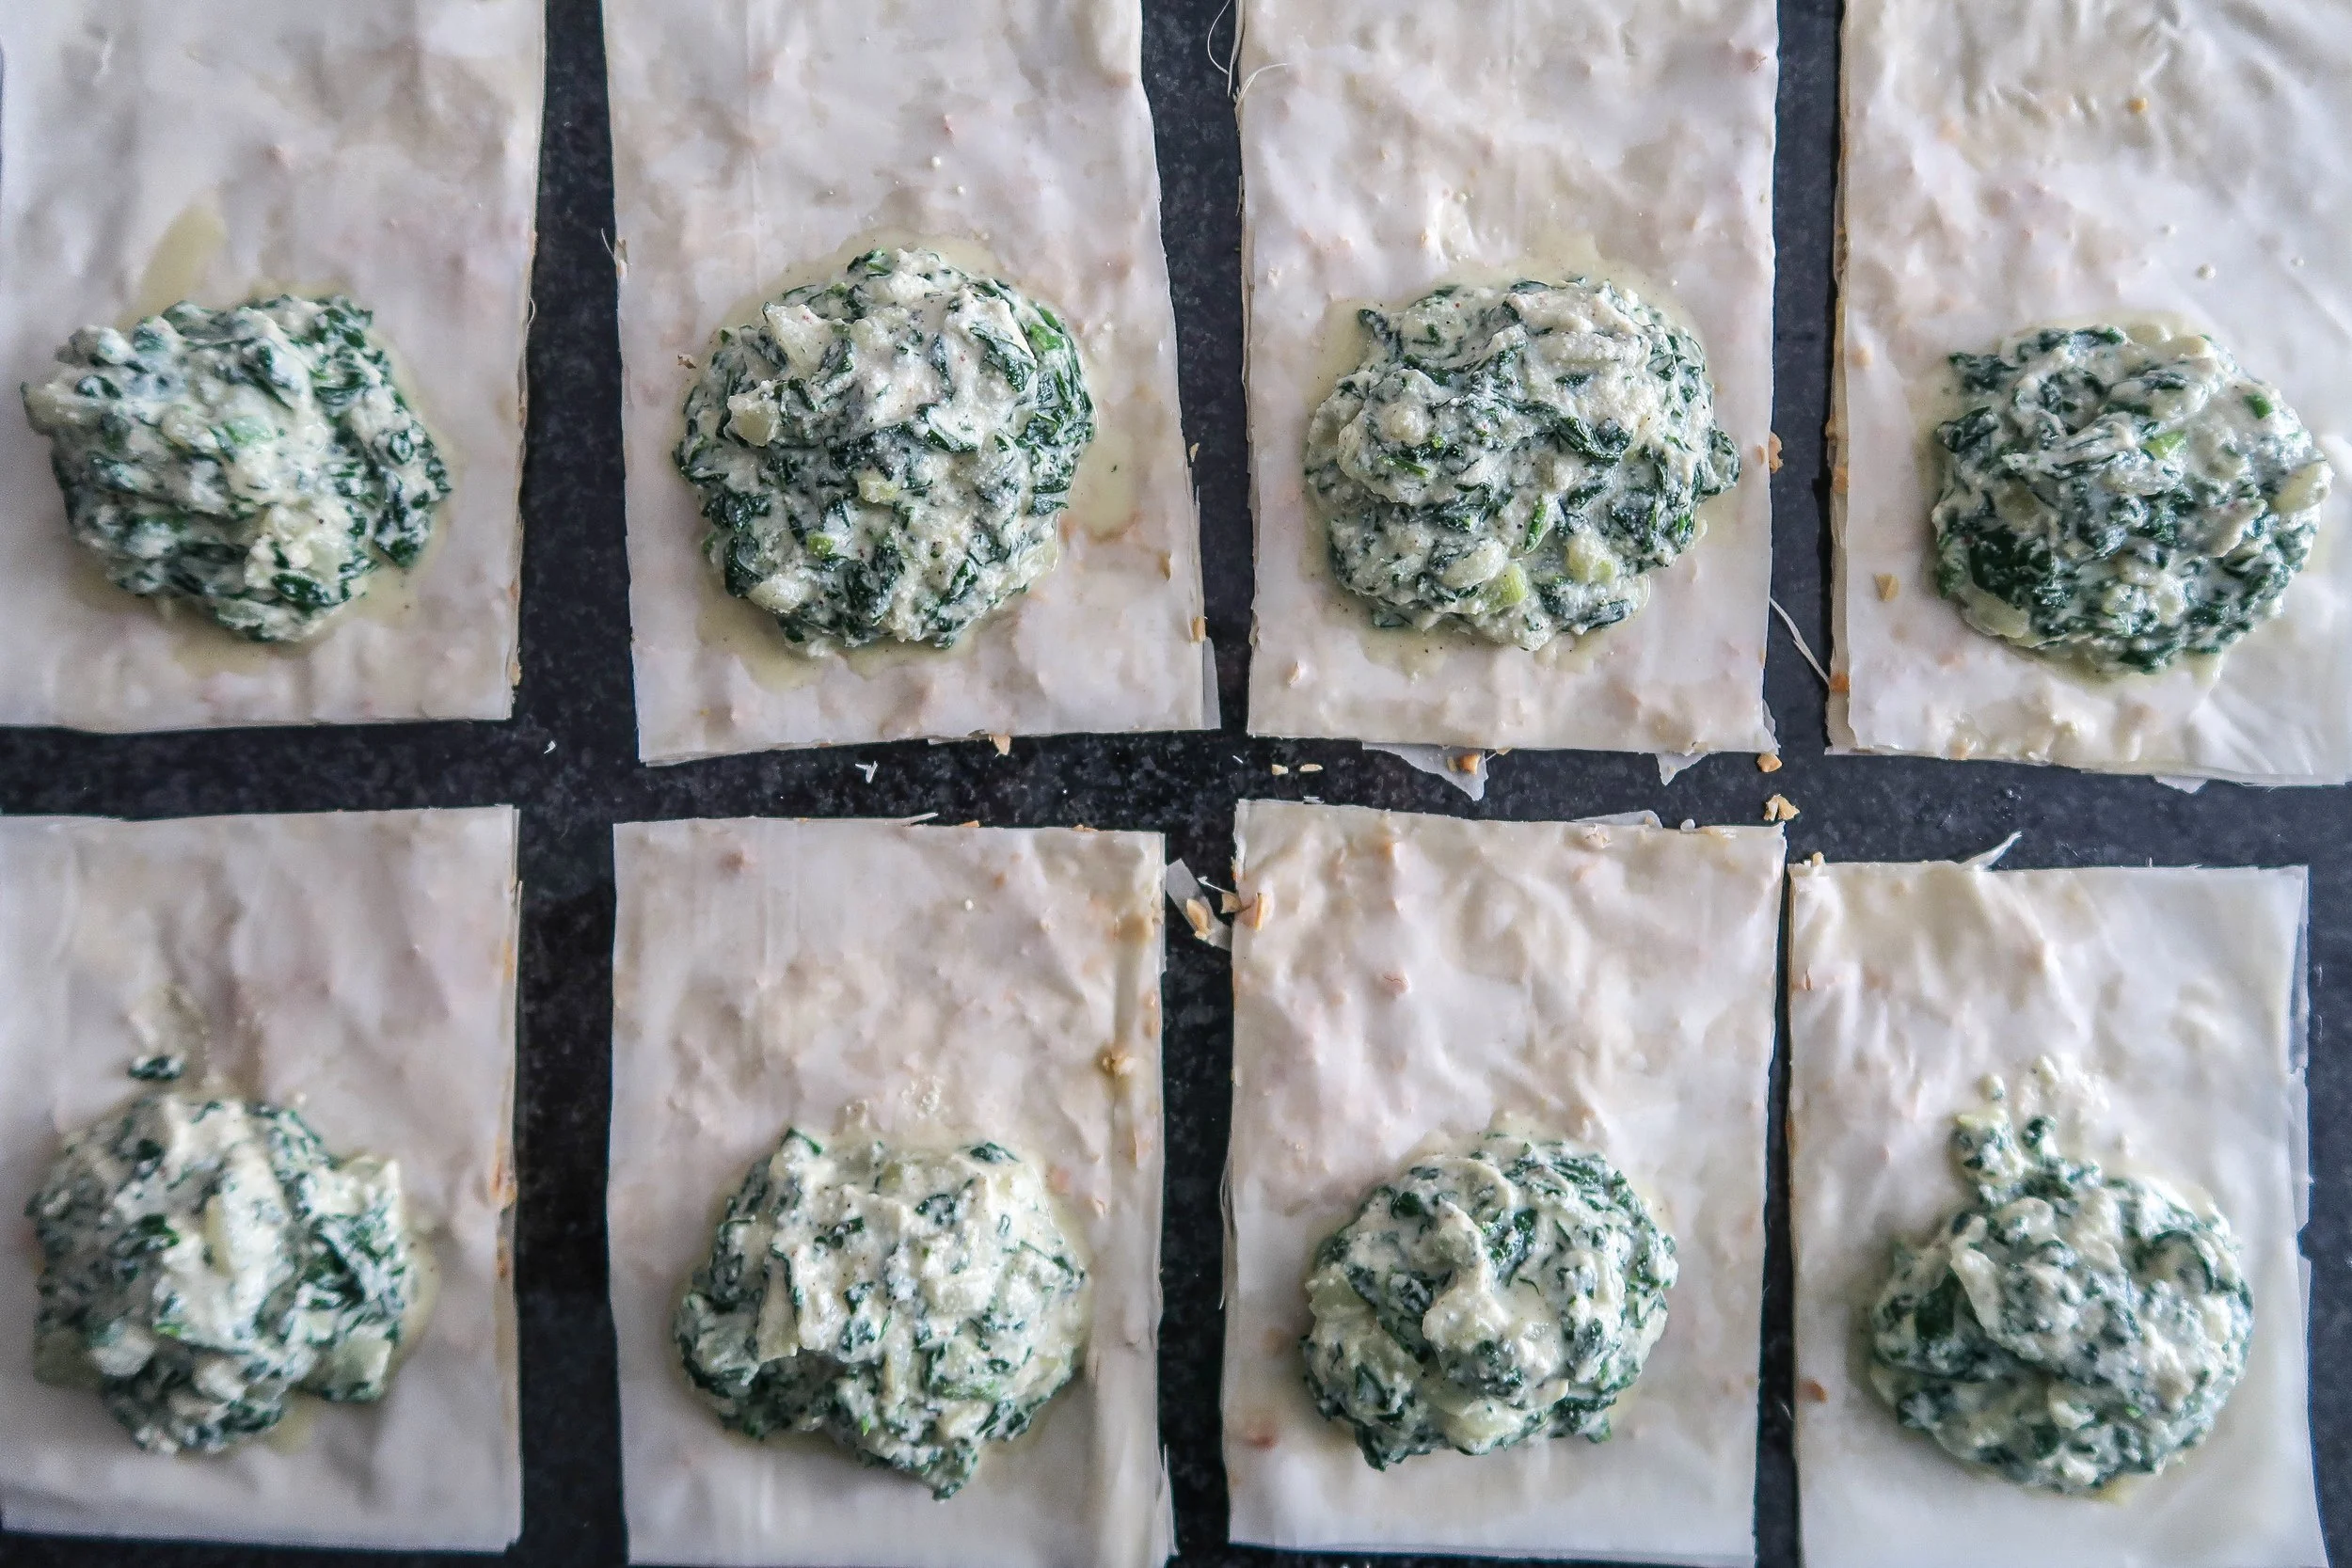 Phyllo dough rectangles with a dollop of spinach and ricotta filling.